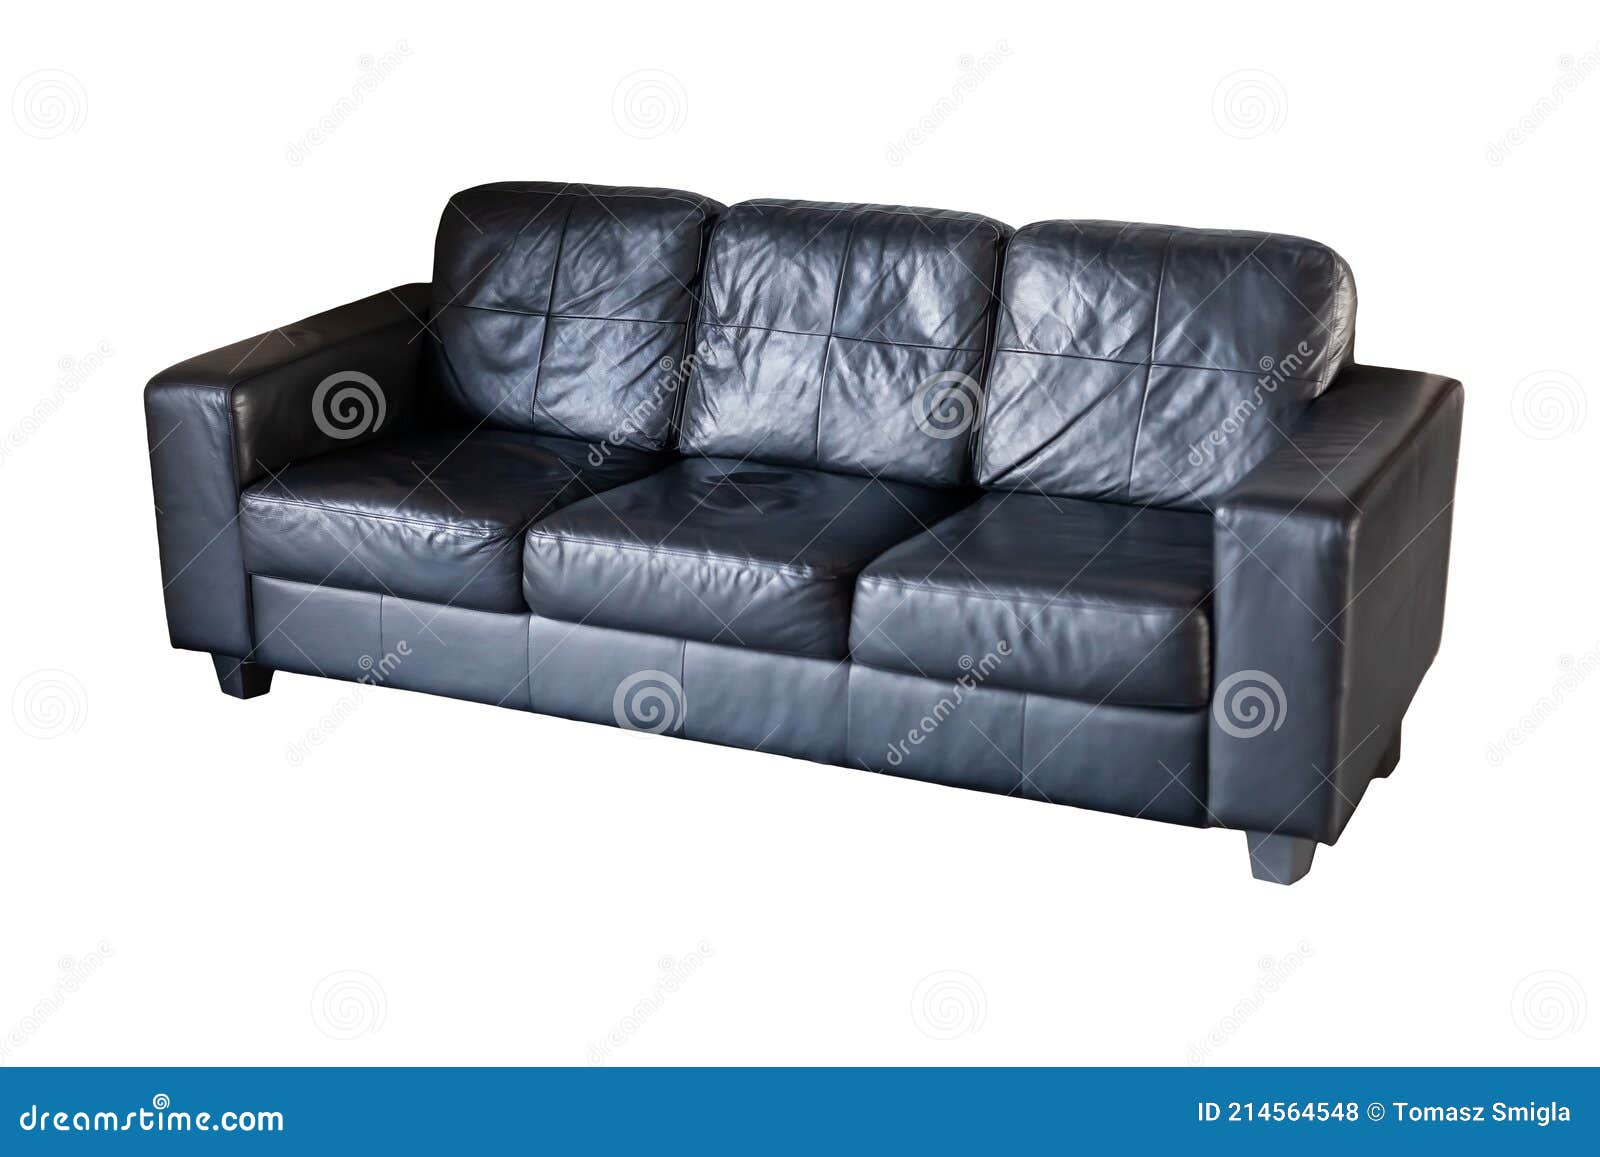 New teen casting couch